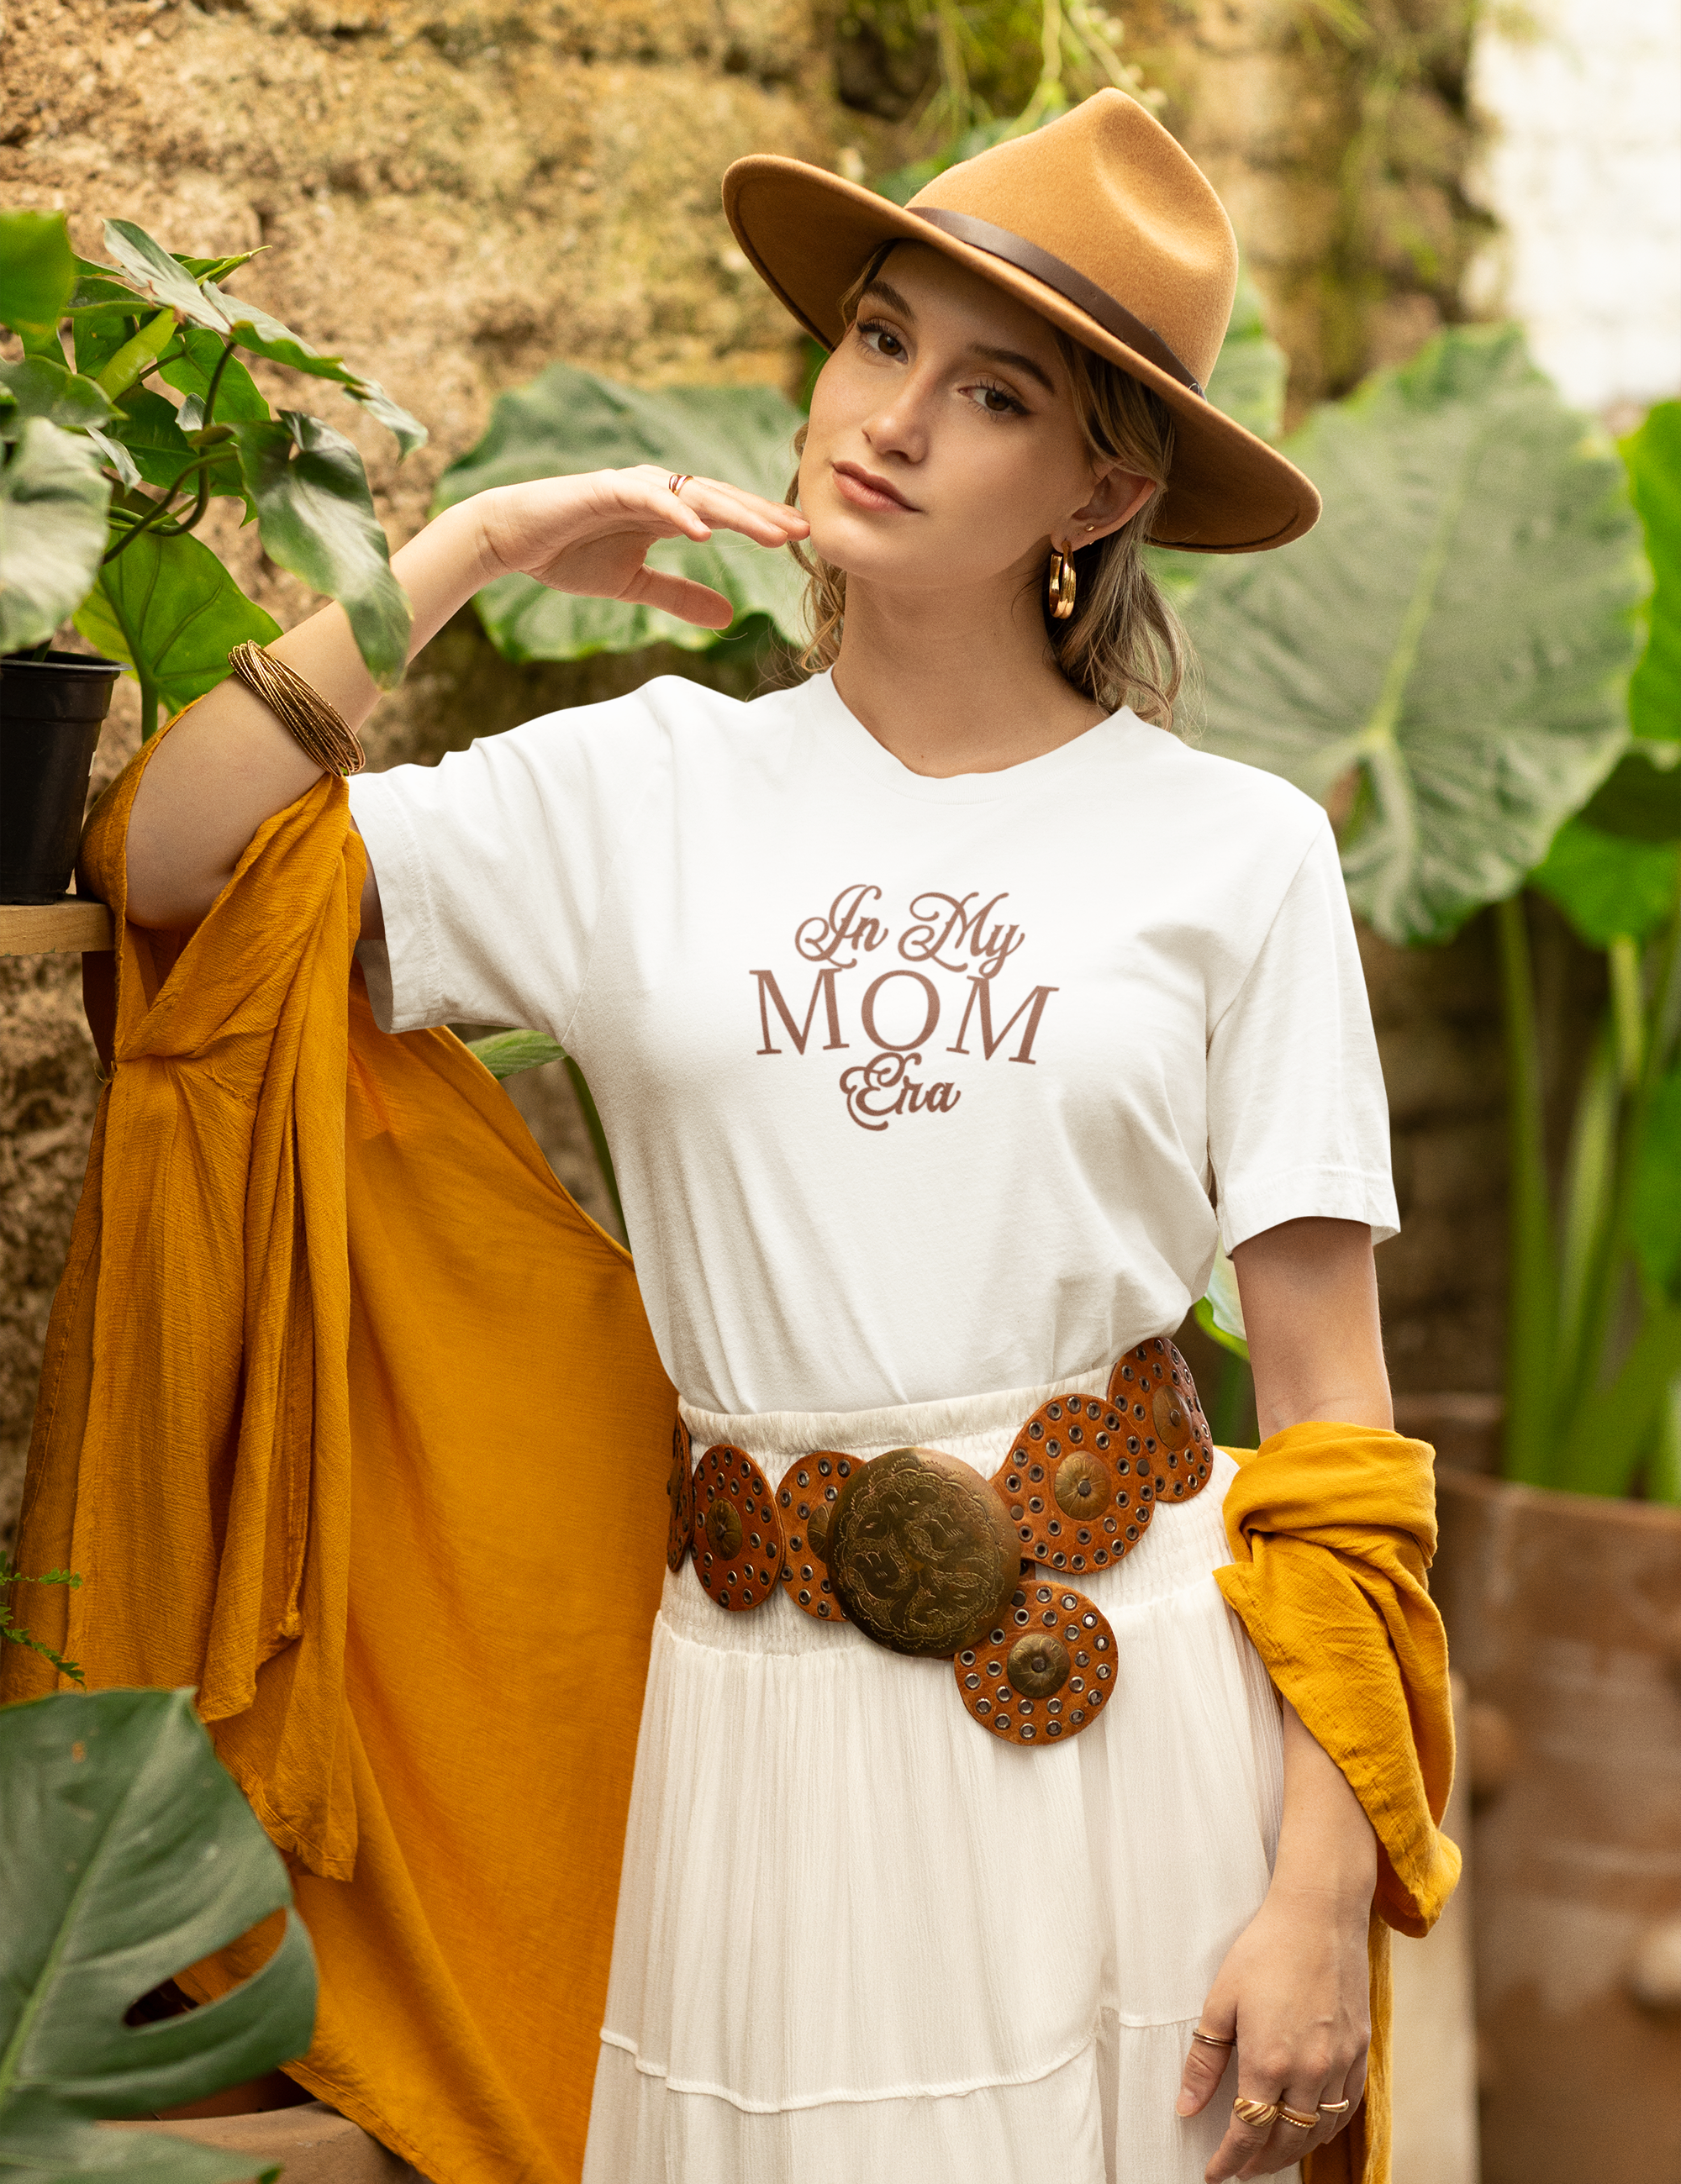 bella-canvas-t-shirt-mockup-of-a-woman-in-a-boho-inspired-outfit-posing-by-some-plants-m36848.png